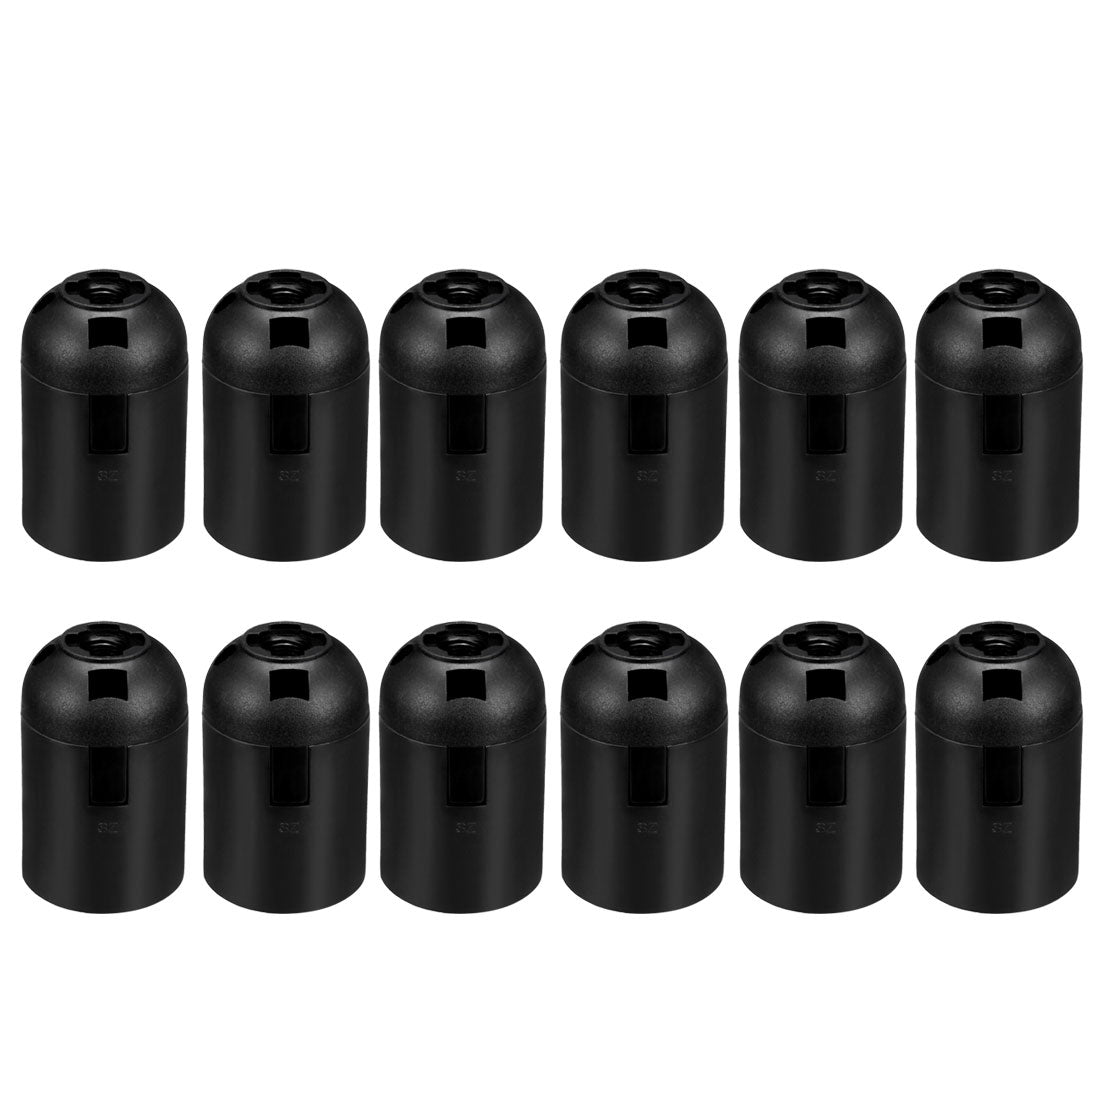 uxcell Uxcell 12Pcs 4A E27 Light Socket Screw Bulb Retro Pendant LED Lamp Holder Without Switch Plastic Black for DIY Projects